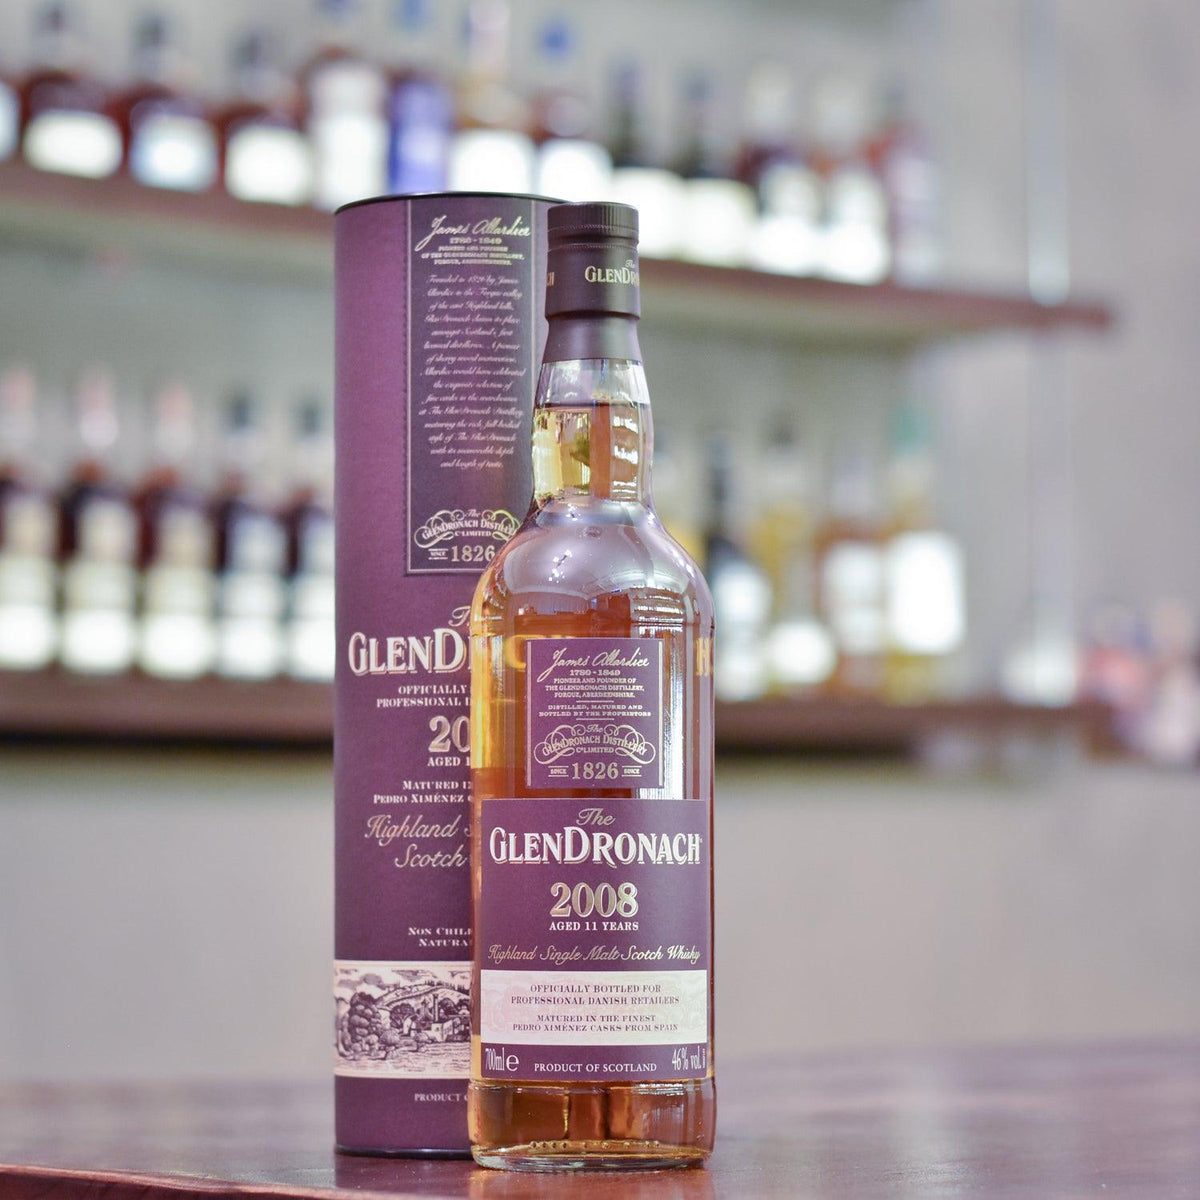 Glendronach 11 Year Old 2008 for Professional Danish Whisky Retailers - The Rare Malt